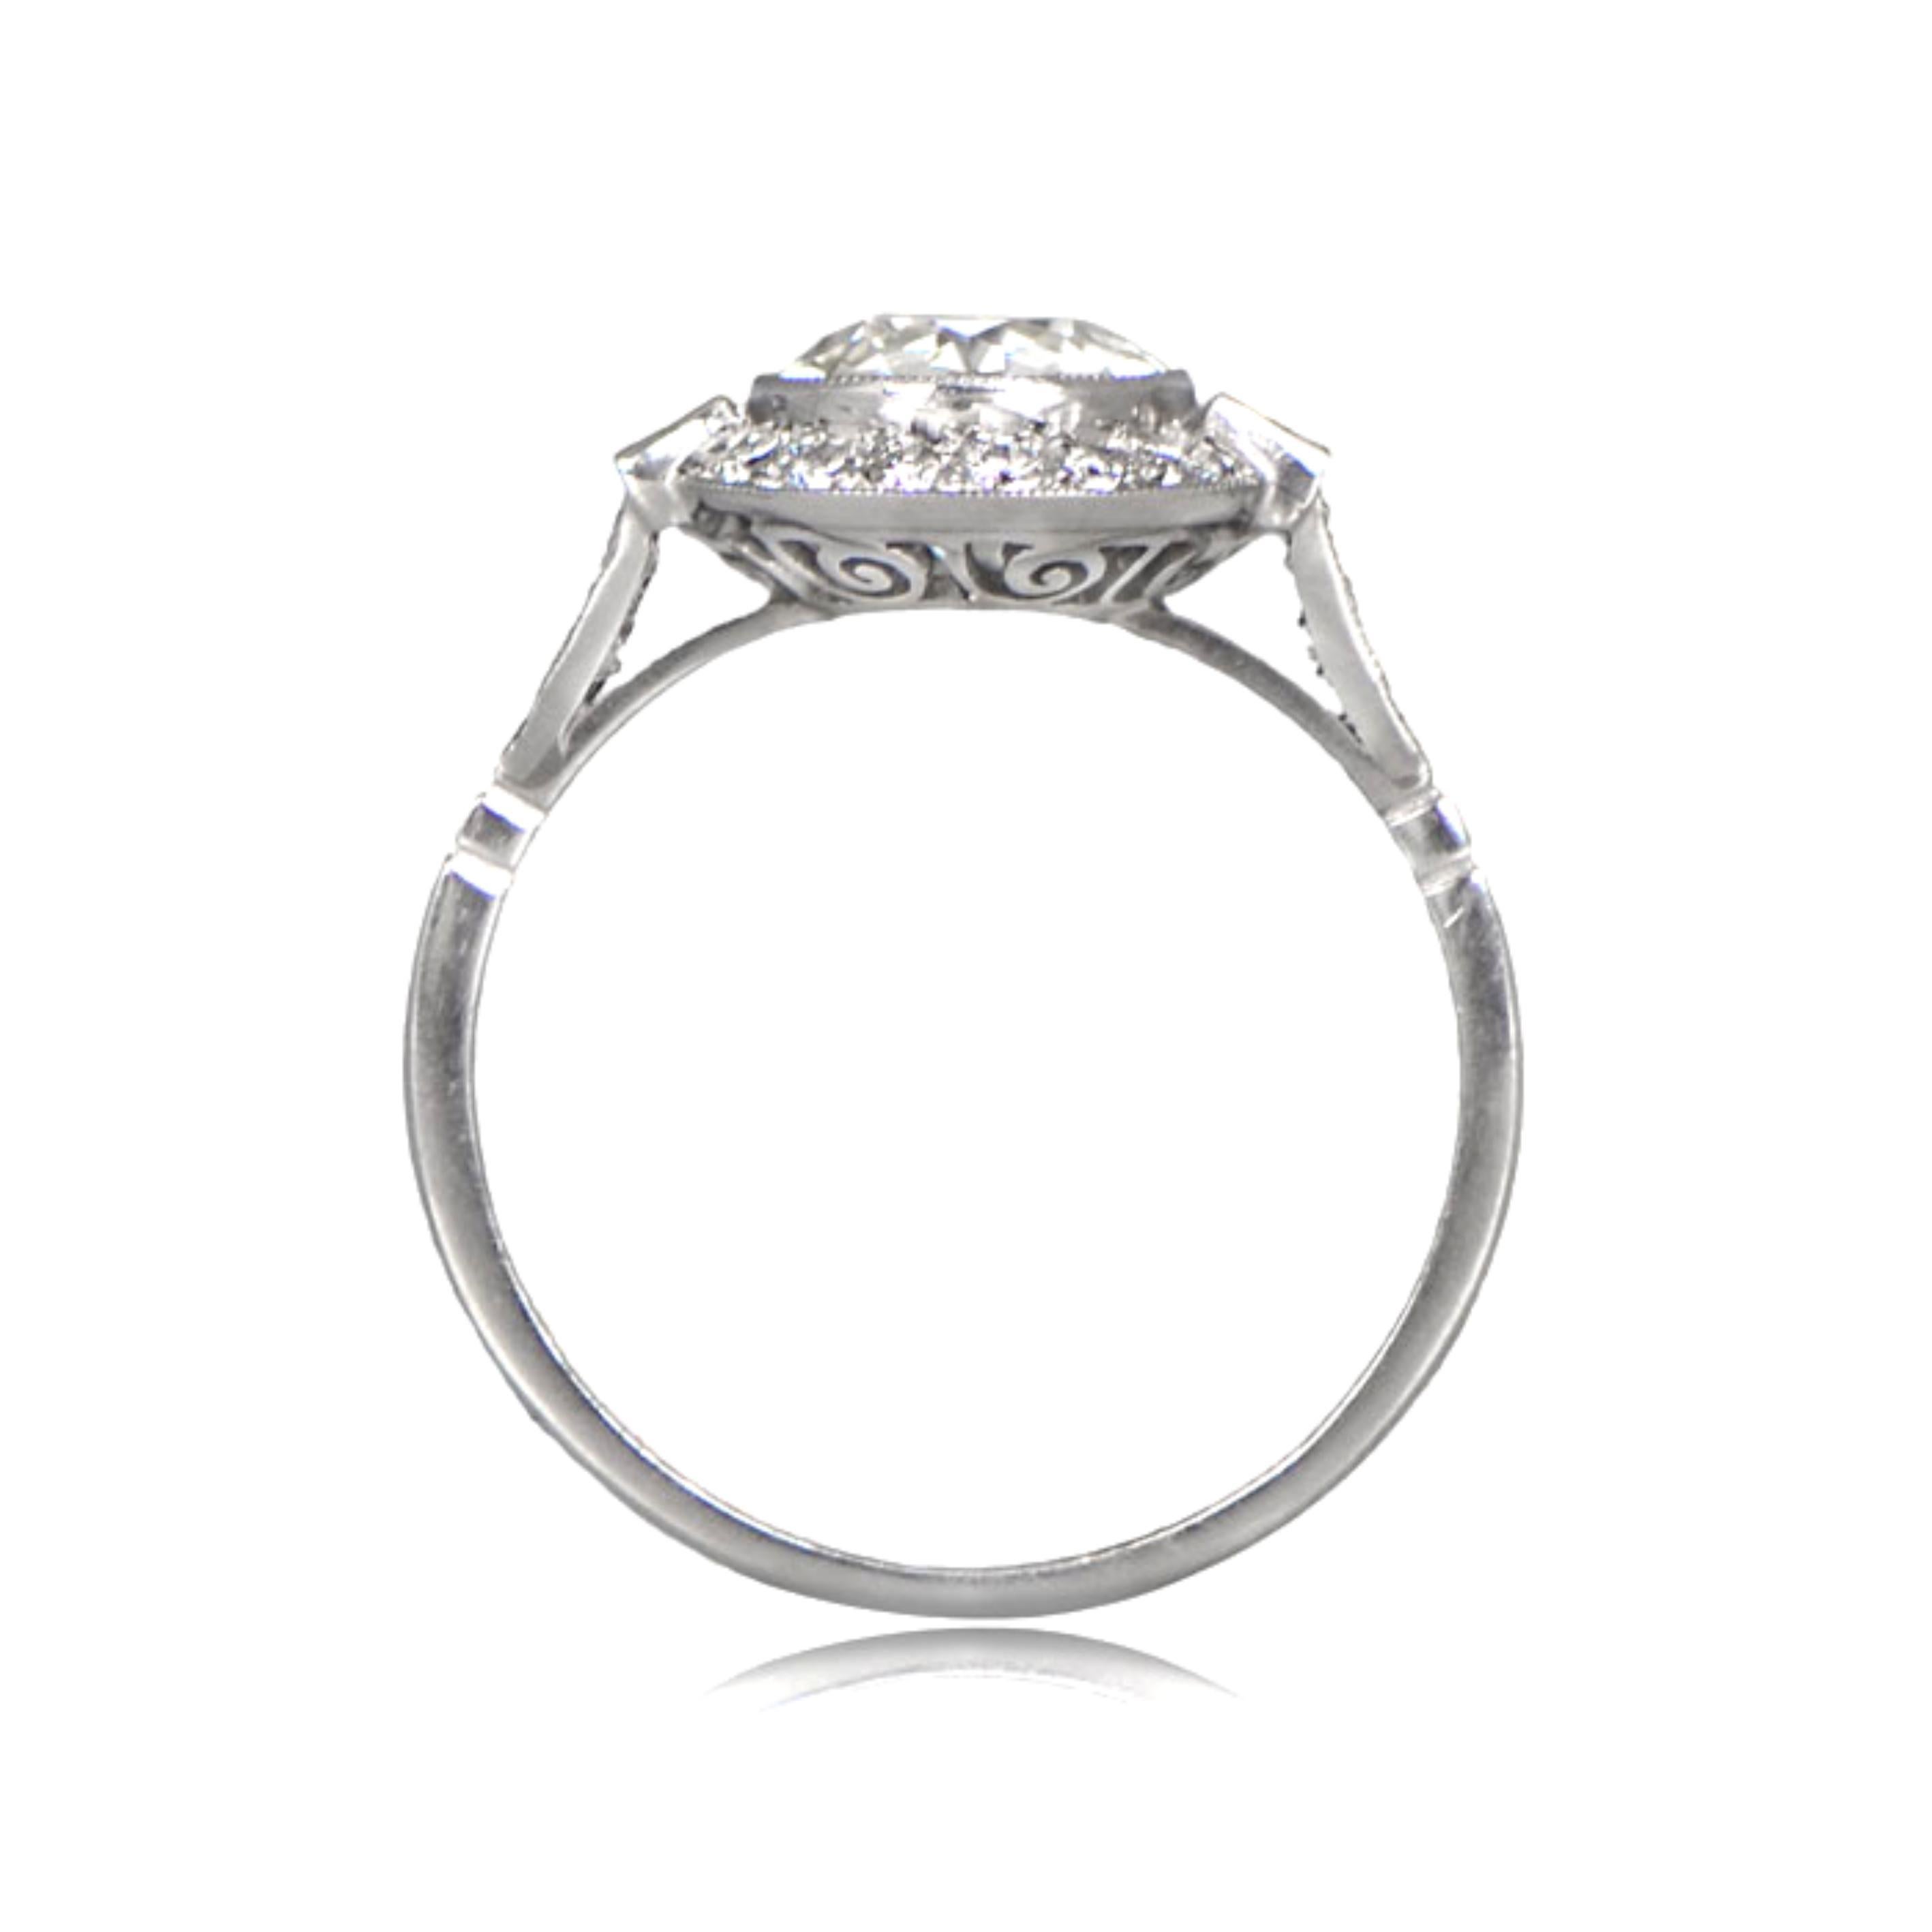 The handcrafted platinum mounting of this stunning ring features a center antique old European cut diamond surrounded by a diamond halo and flanked by baguette-cut diamonds. The shoulders are also adorned with diamonds, while the lower gallery